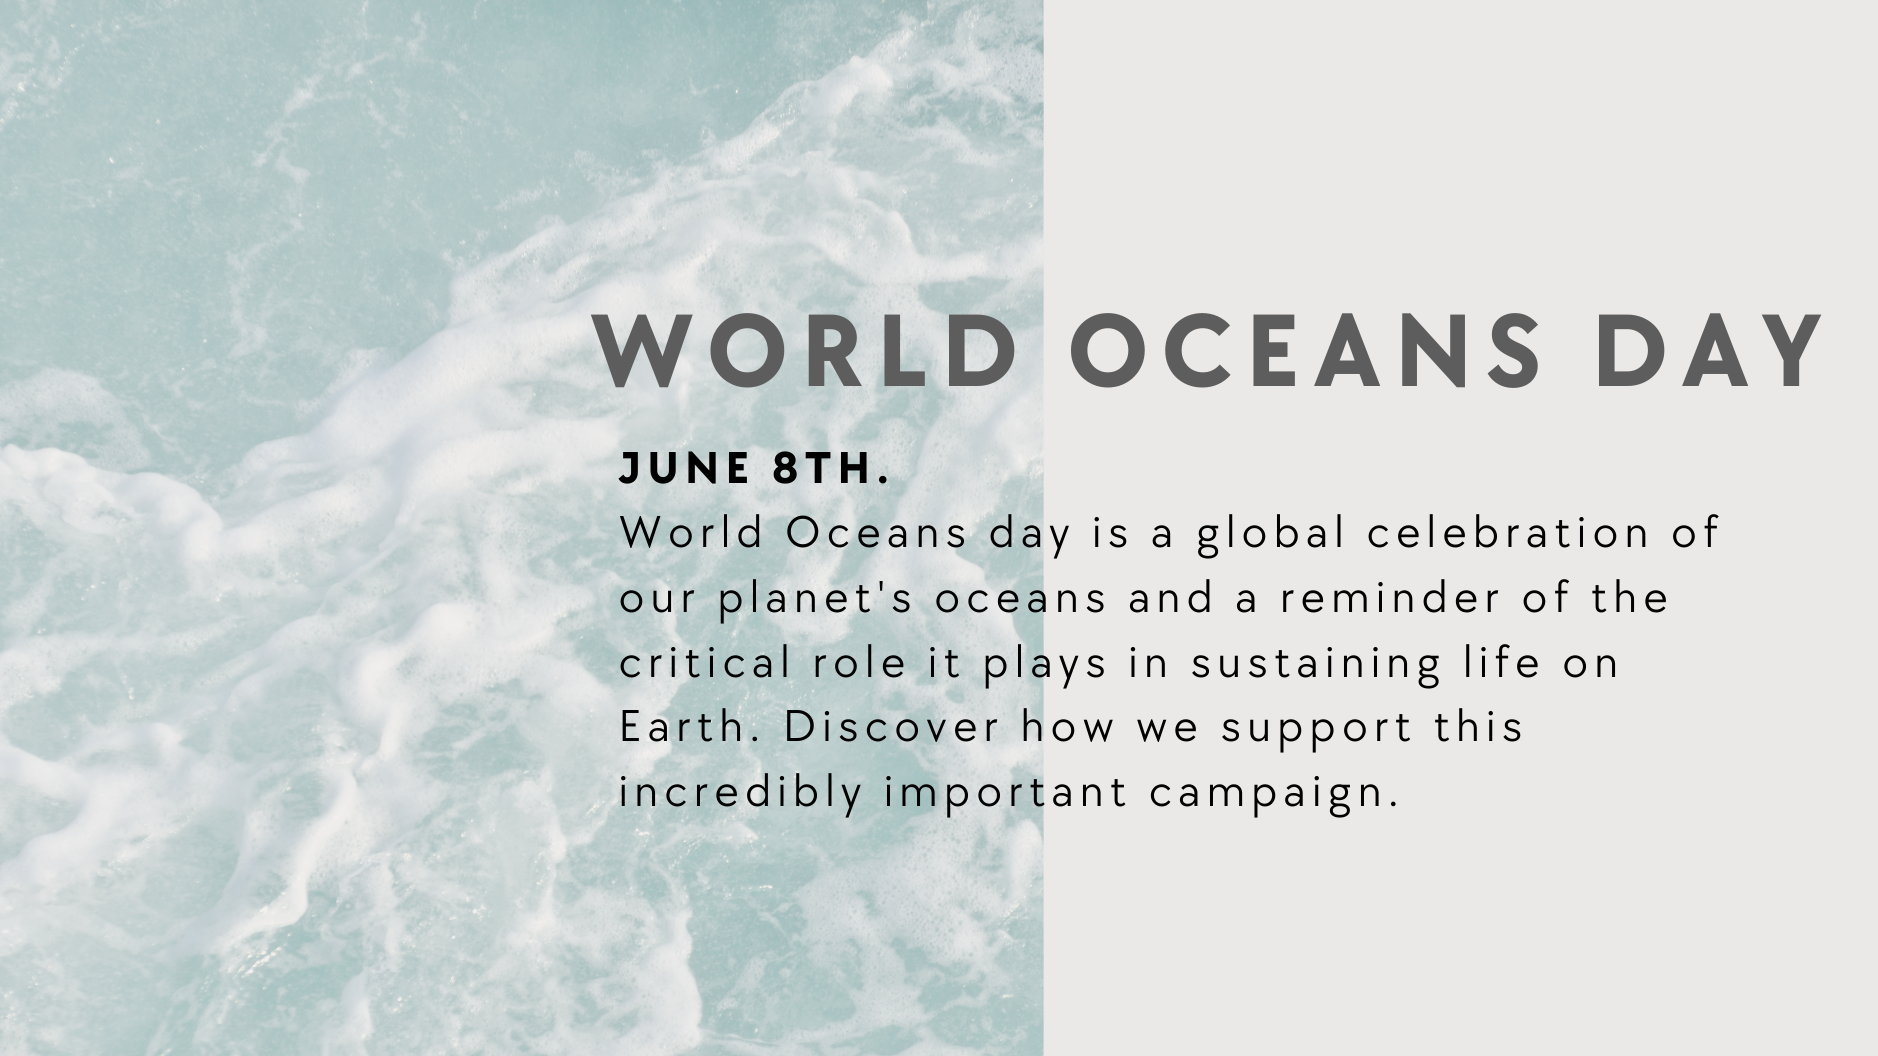 Surfing for Change on World Oceans Day